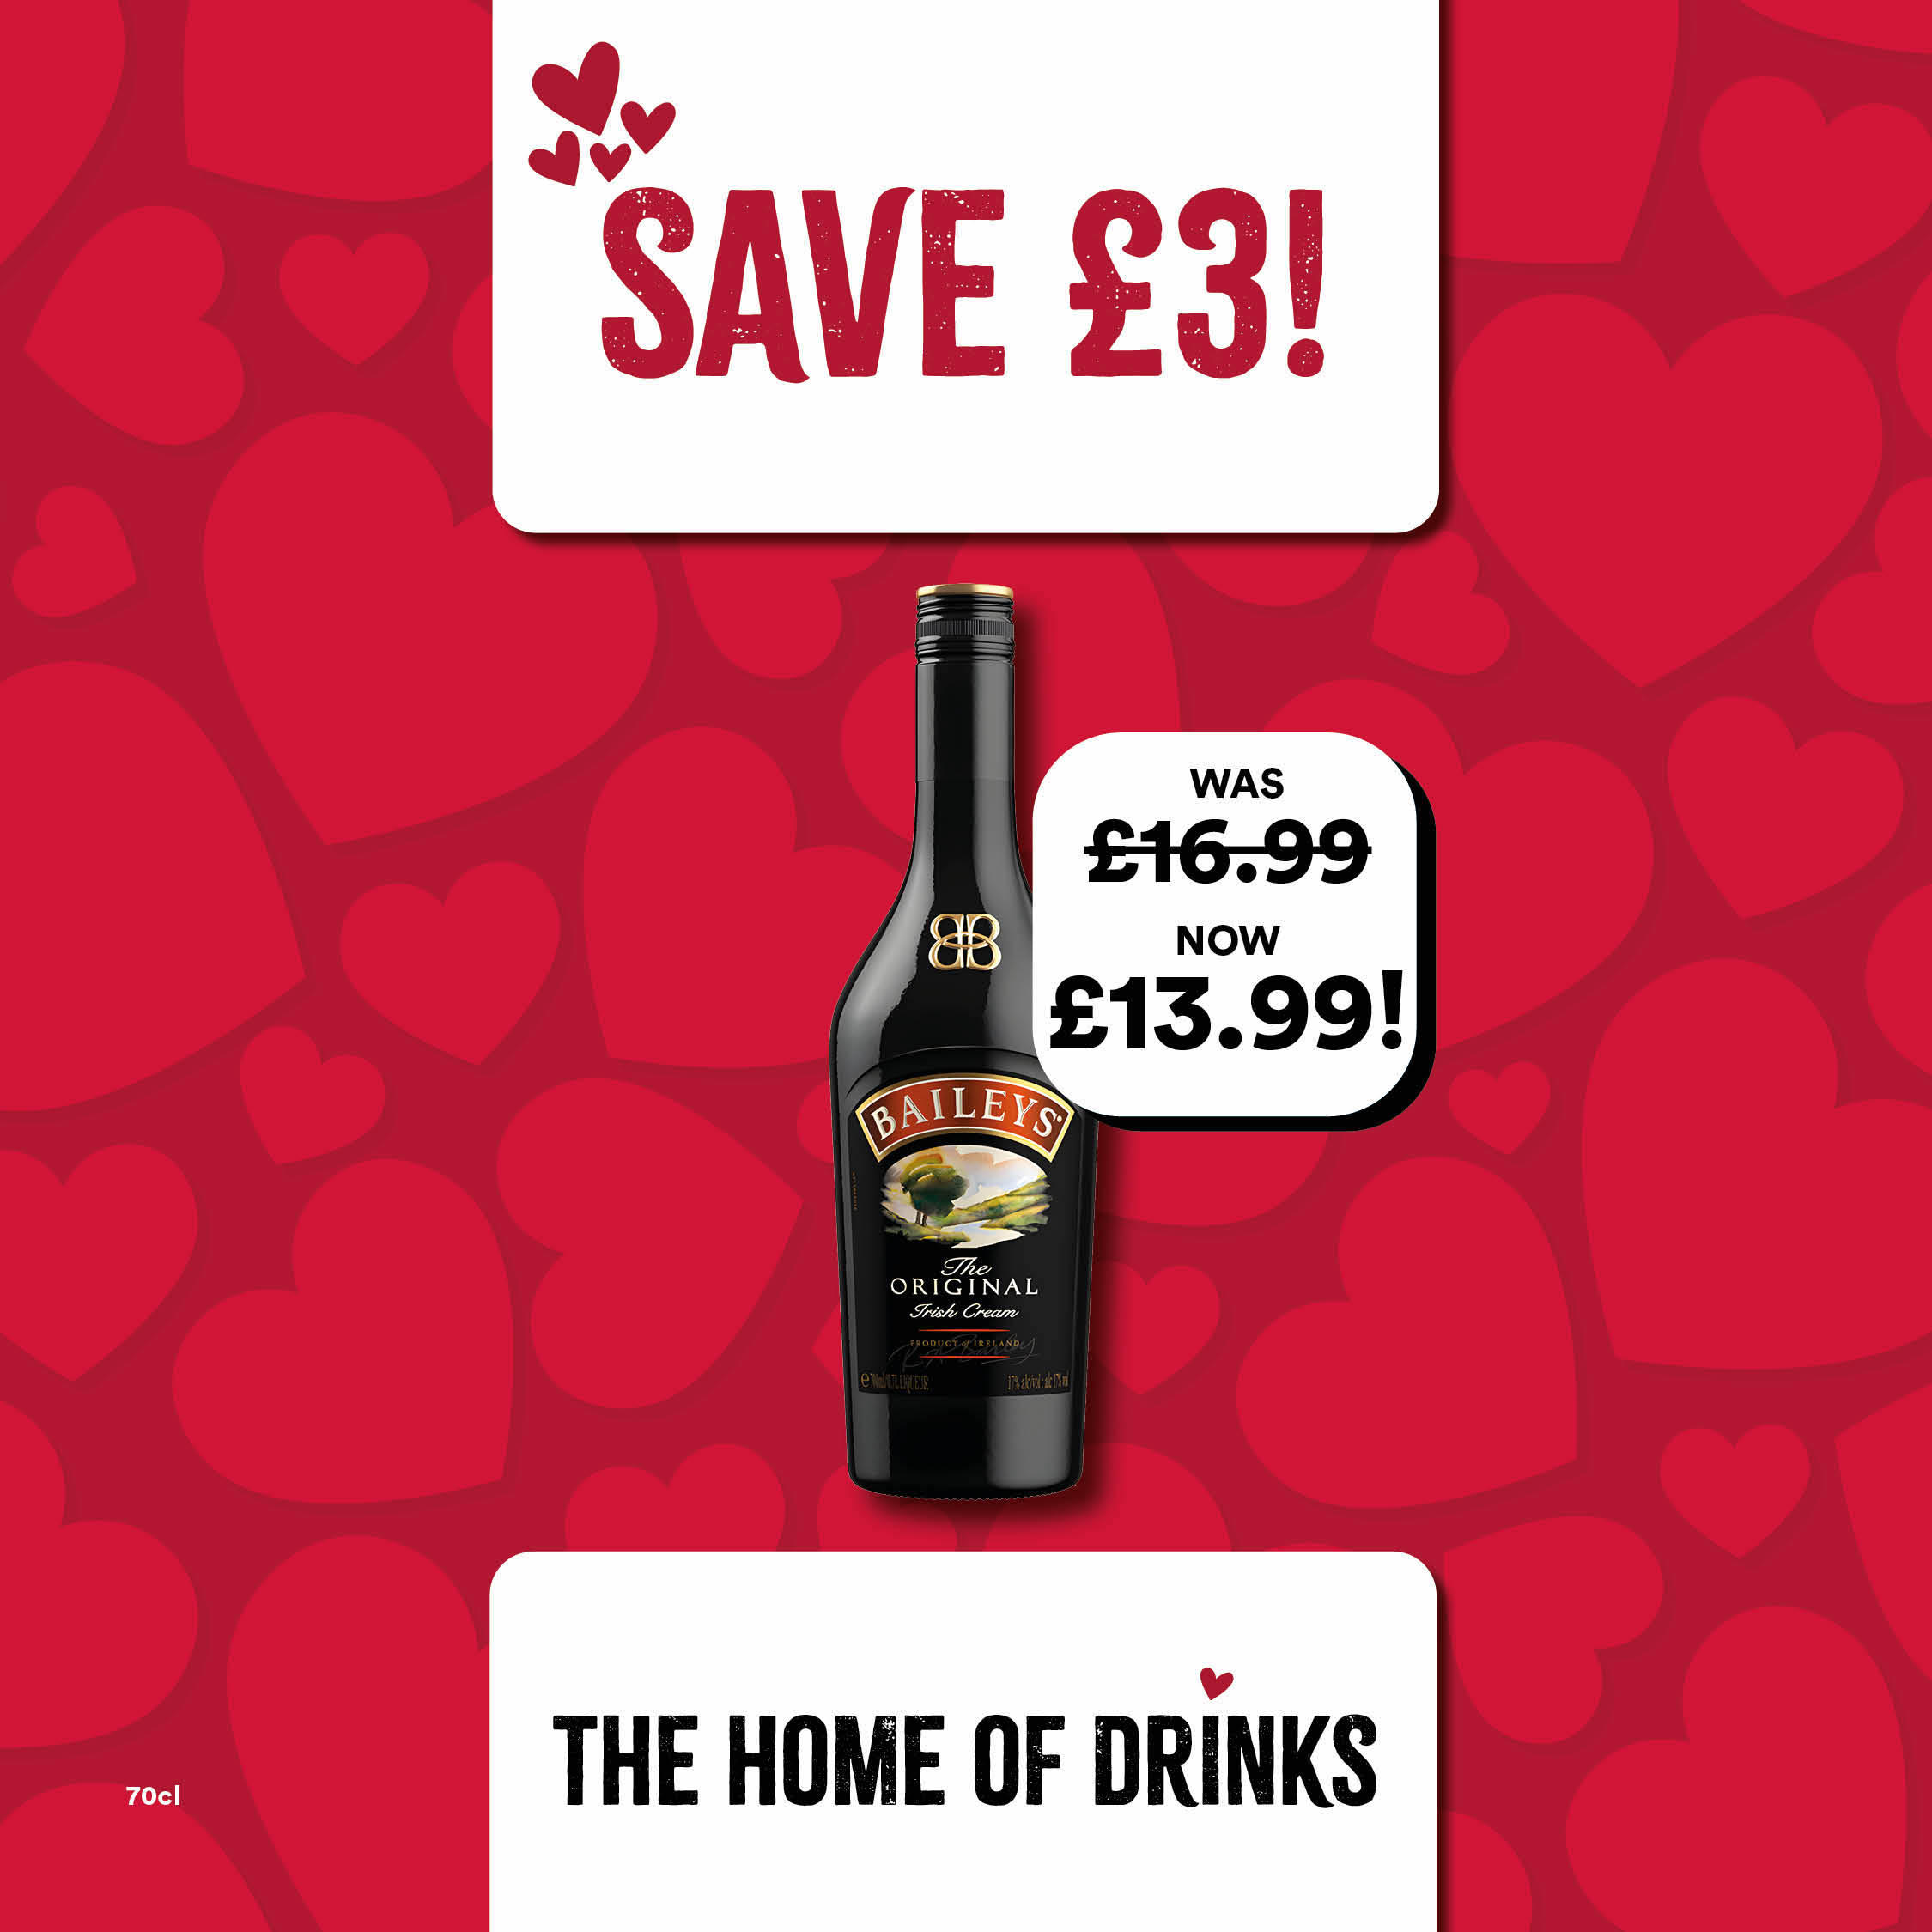 Save £3 on Baileys 70cl - Now Only £13.99